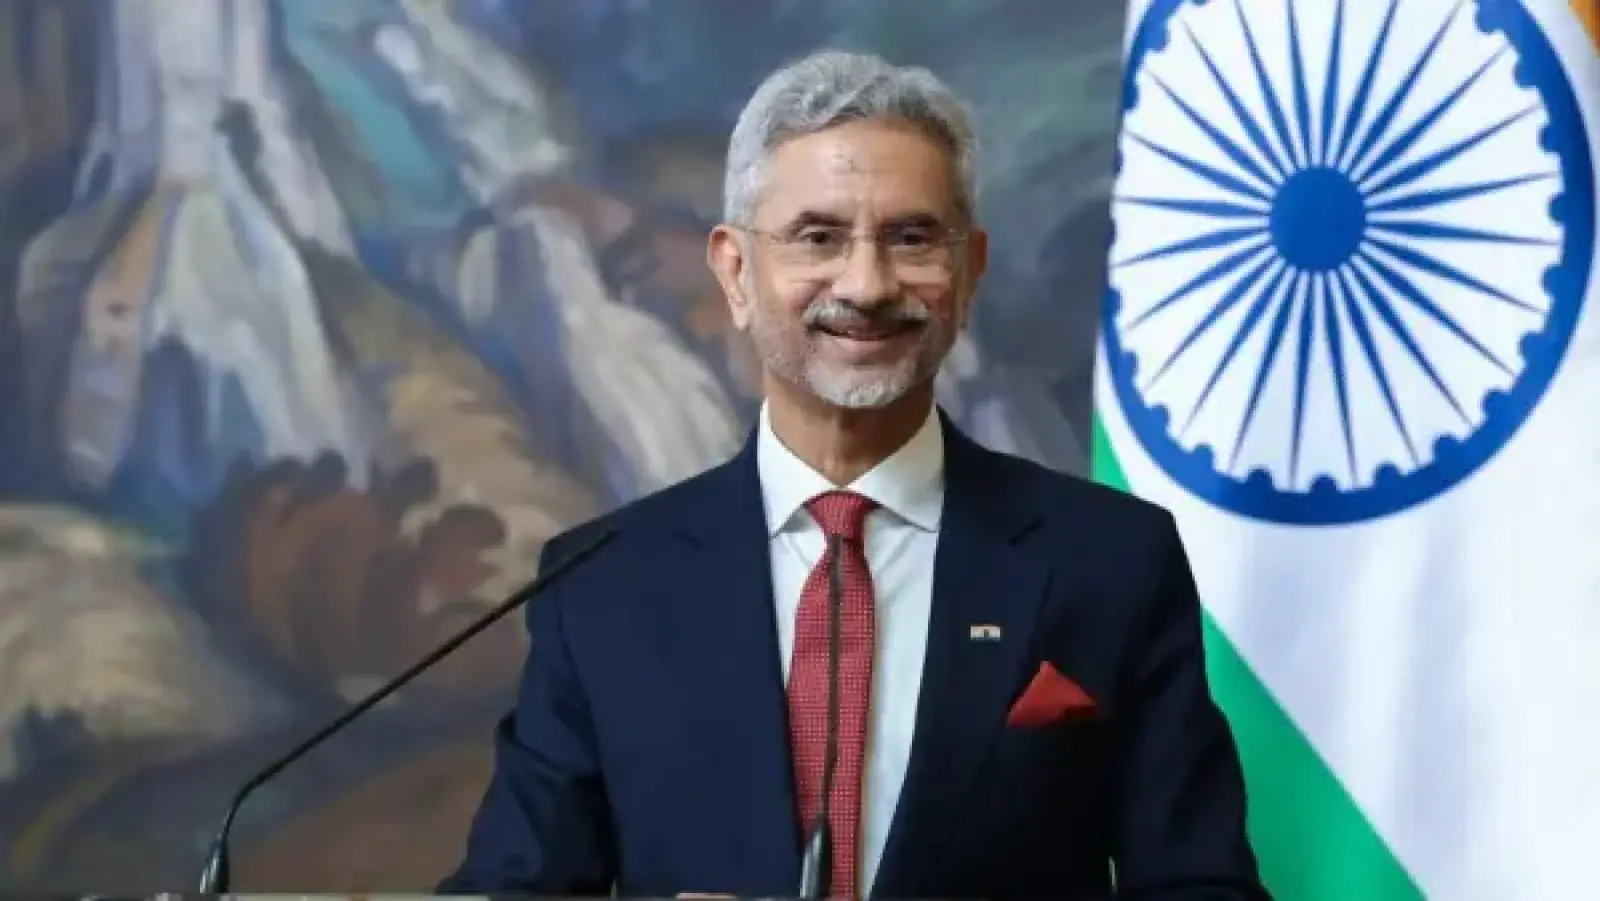 'Demand for Indian talent is increasing globally', Foreign Minister Jaishankar said why this is happening